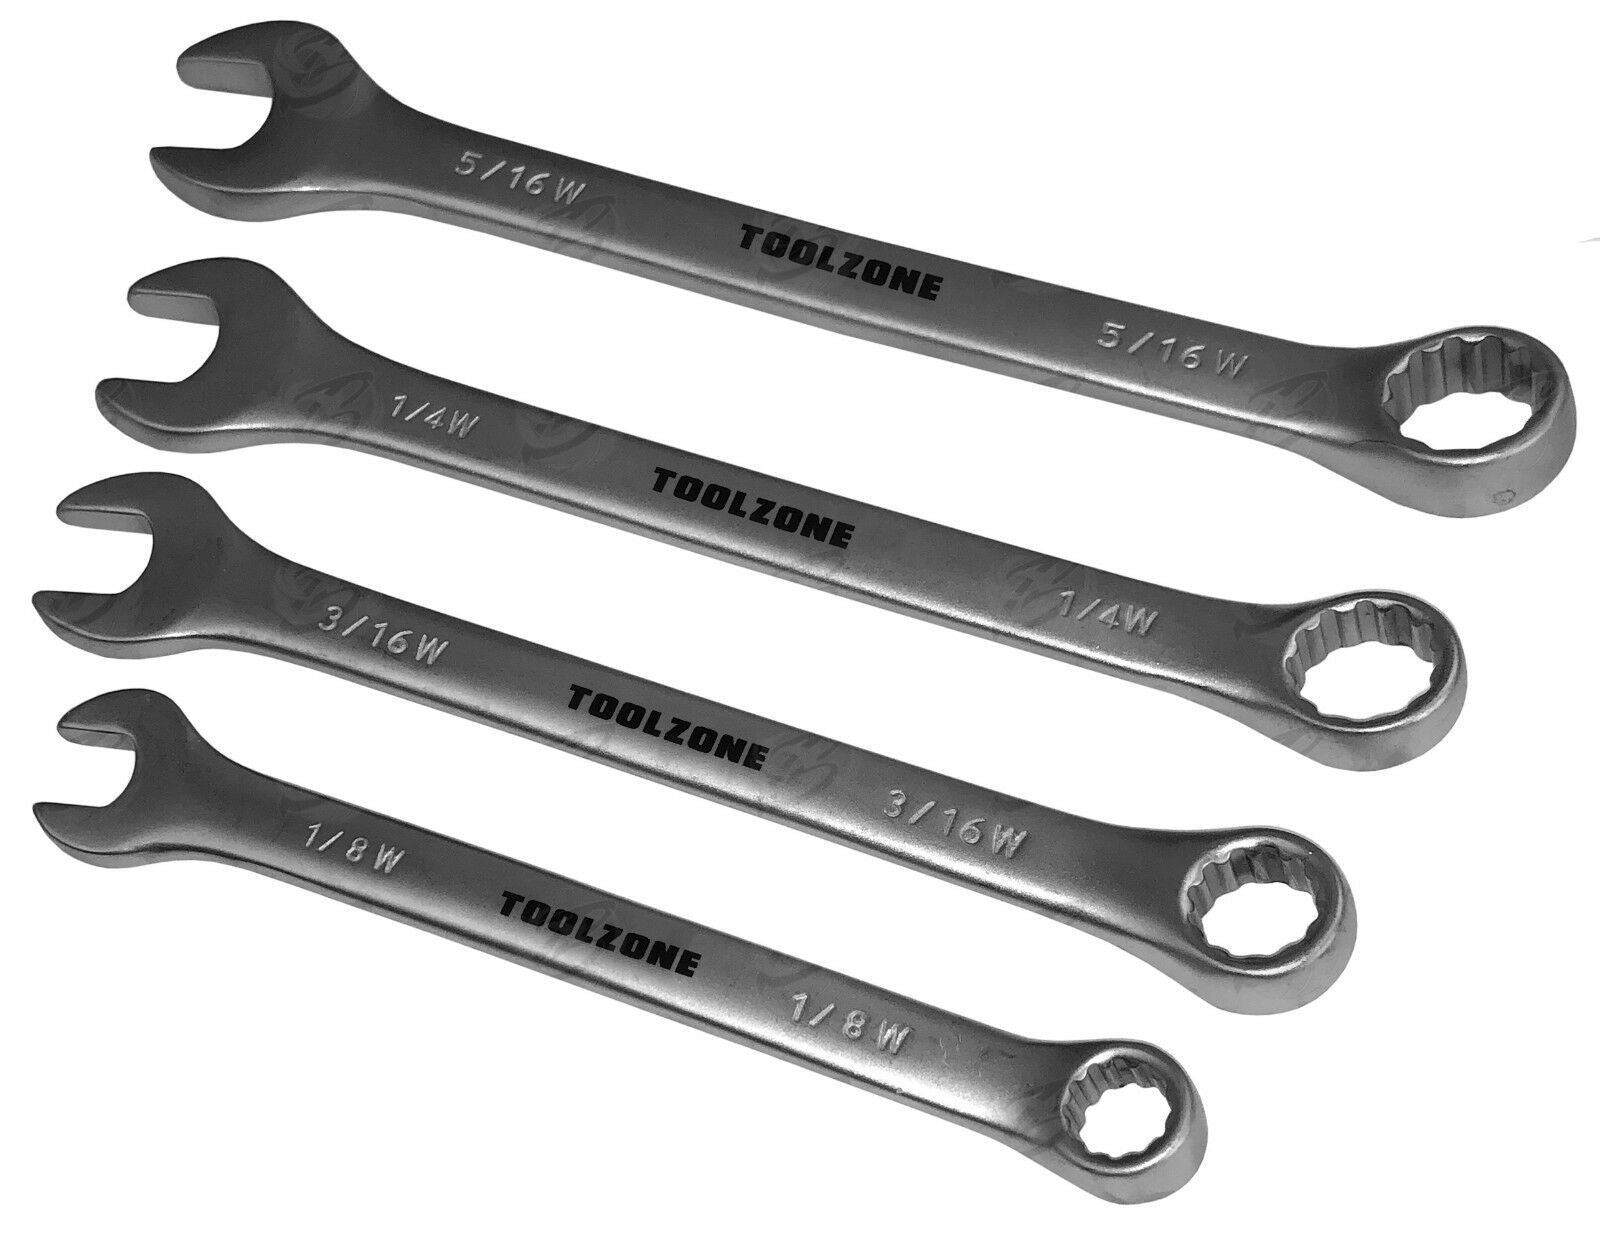 TOOLZONE 8PCS WHITWORTH COMBINATION SPANNERS 1/8" - 9/16"